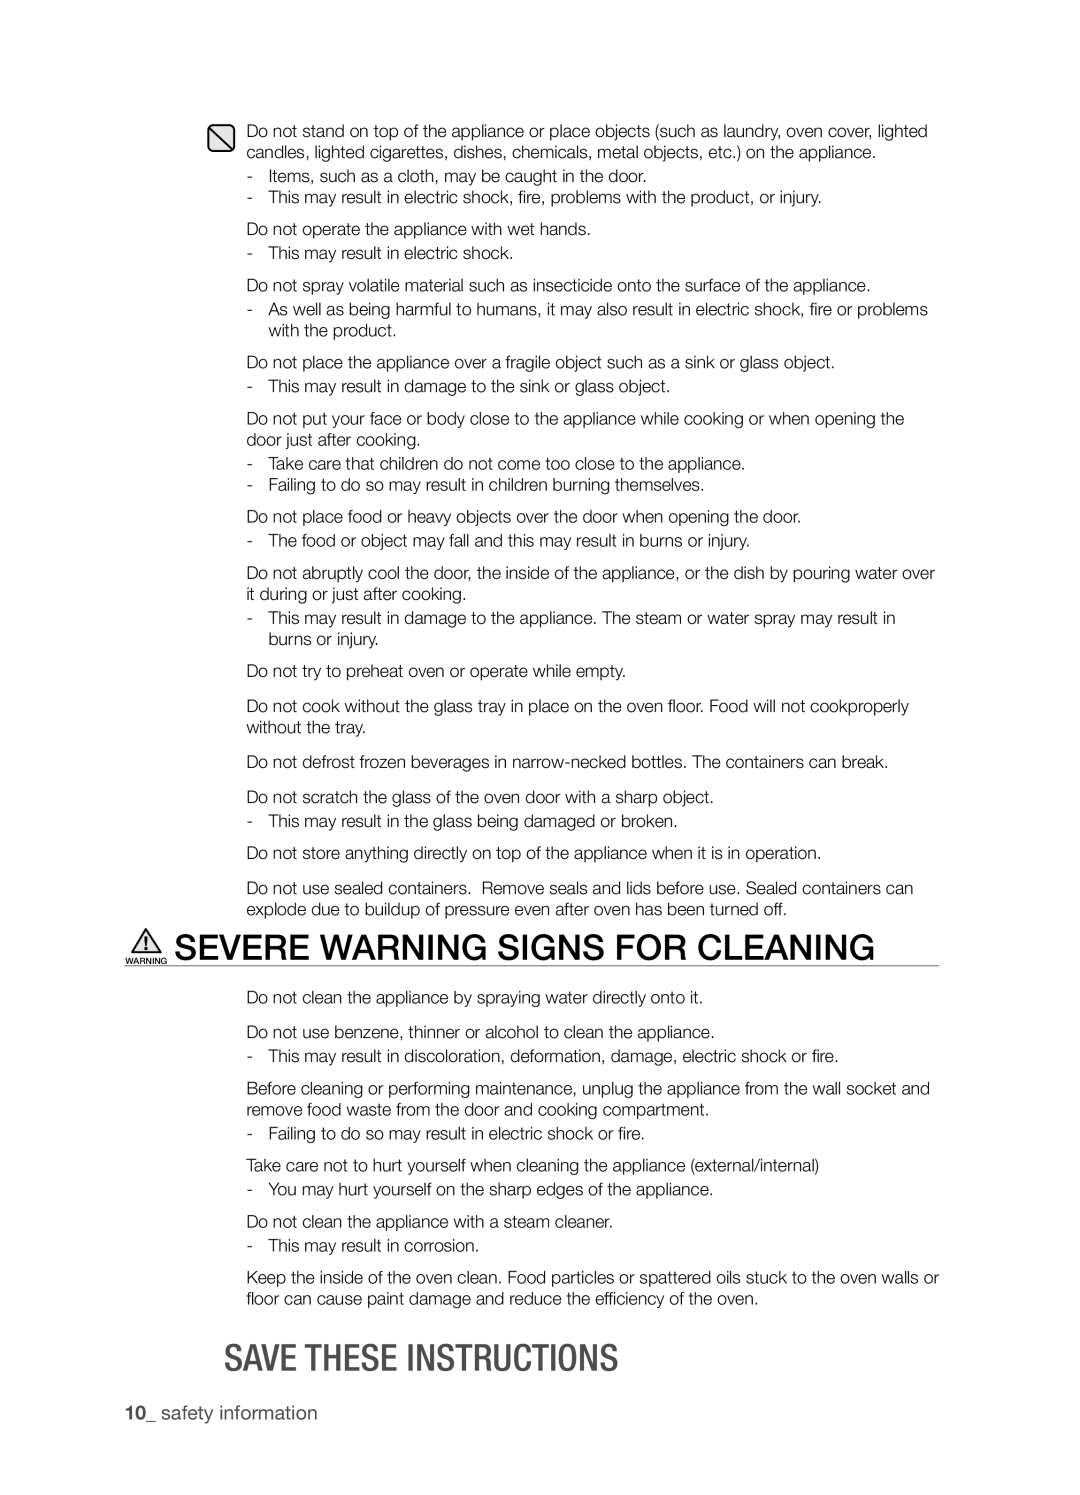 Samsung SMH9151 user manual Warning Severe Warning Signs For Cleaning, Save these instructions, safety information 